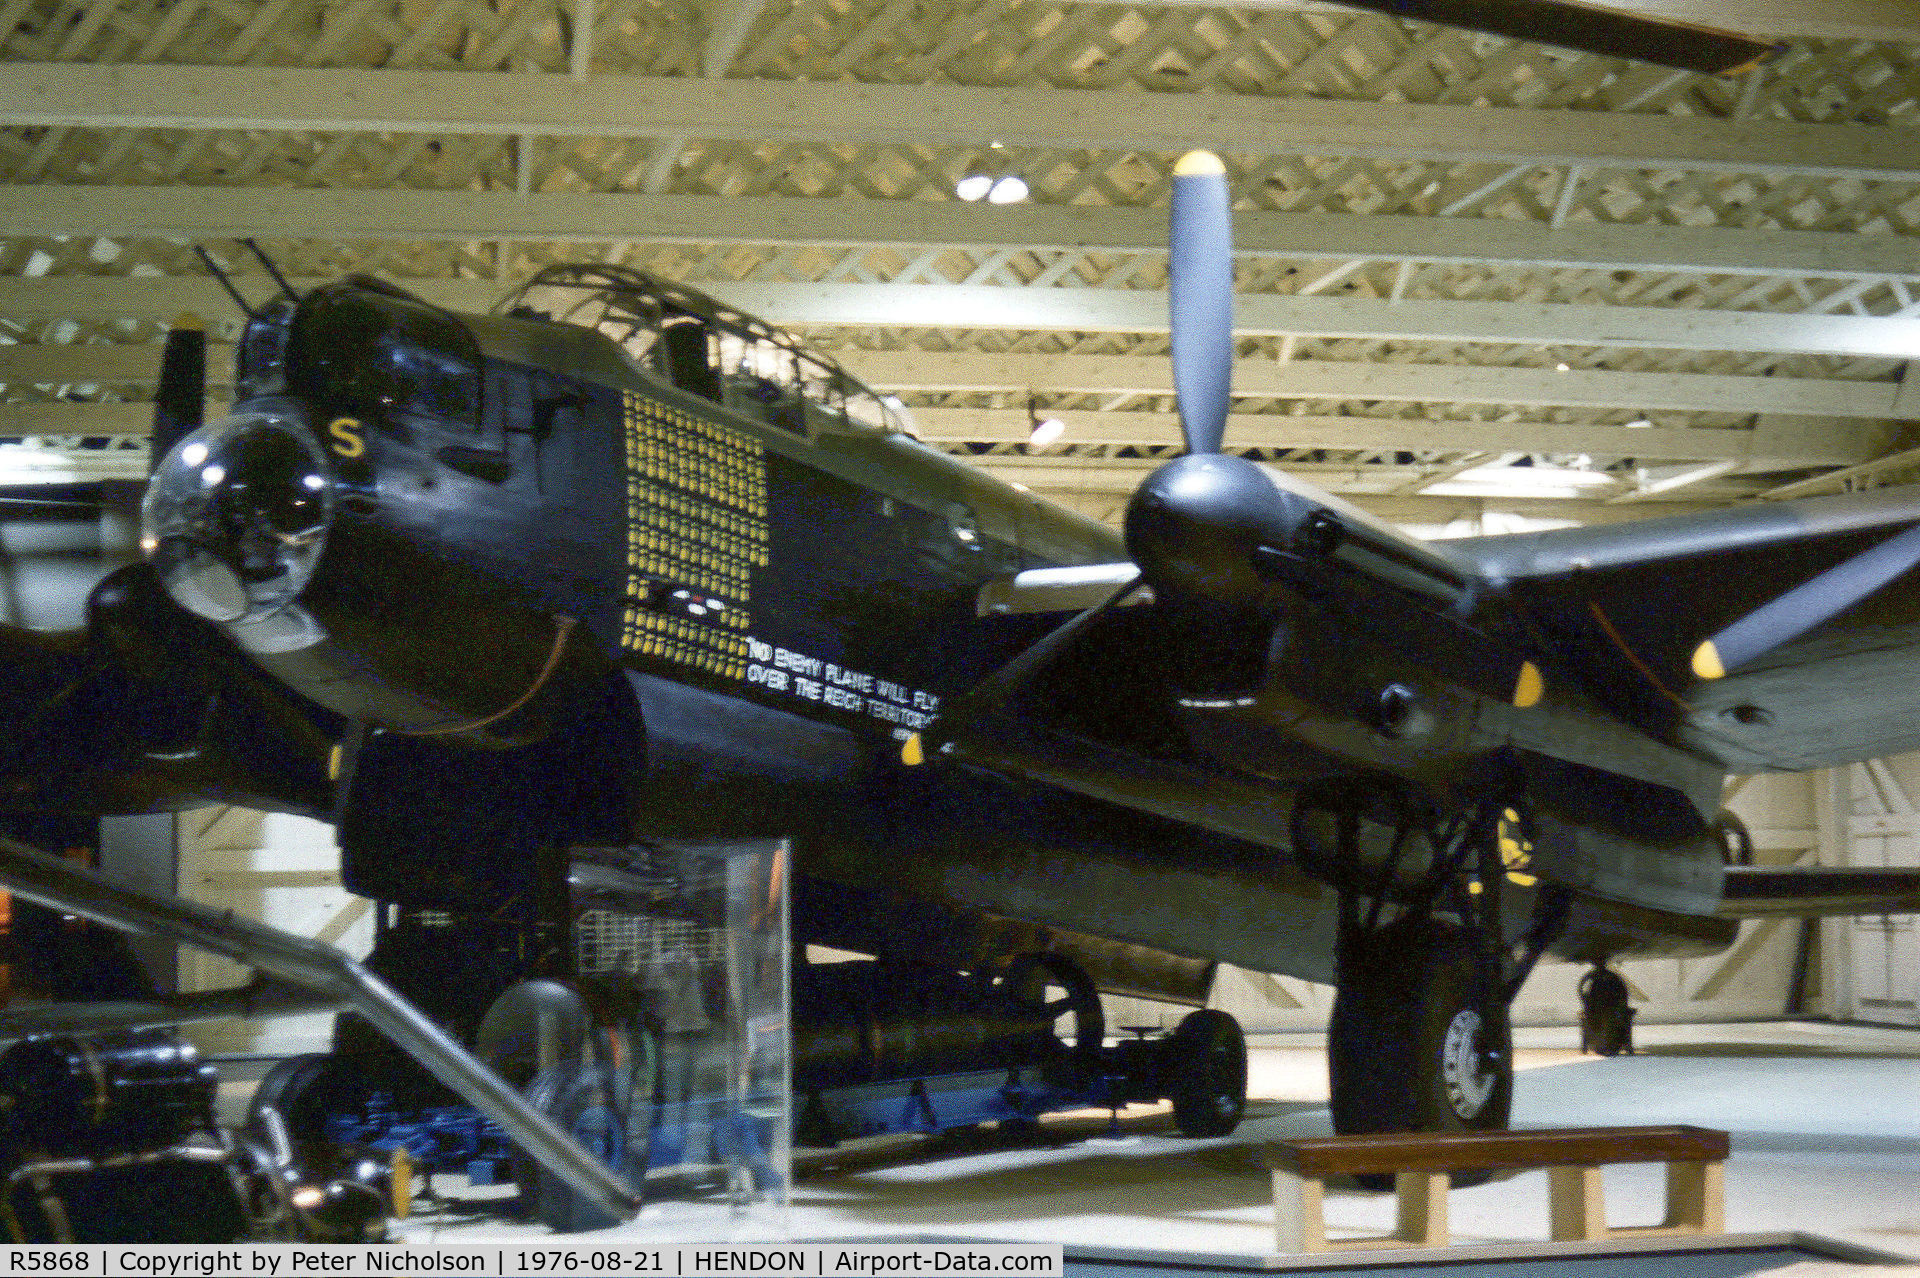 R5868, Avro 683 Lancaster B1 C/N Not found R5868, Avro Lancaster I S-Sugar of 467 Squadron of the Royal Air Force Museum Hendon as displayed in the Summer of 1976.